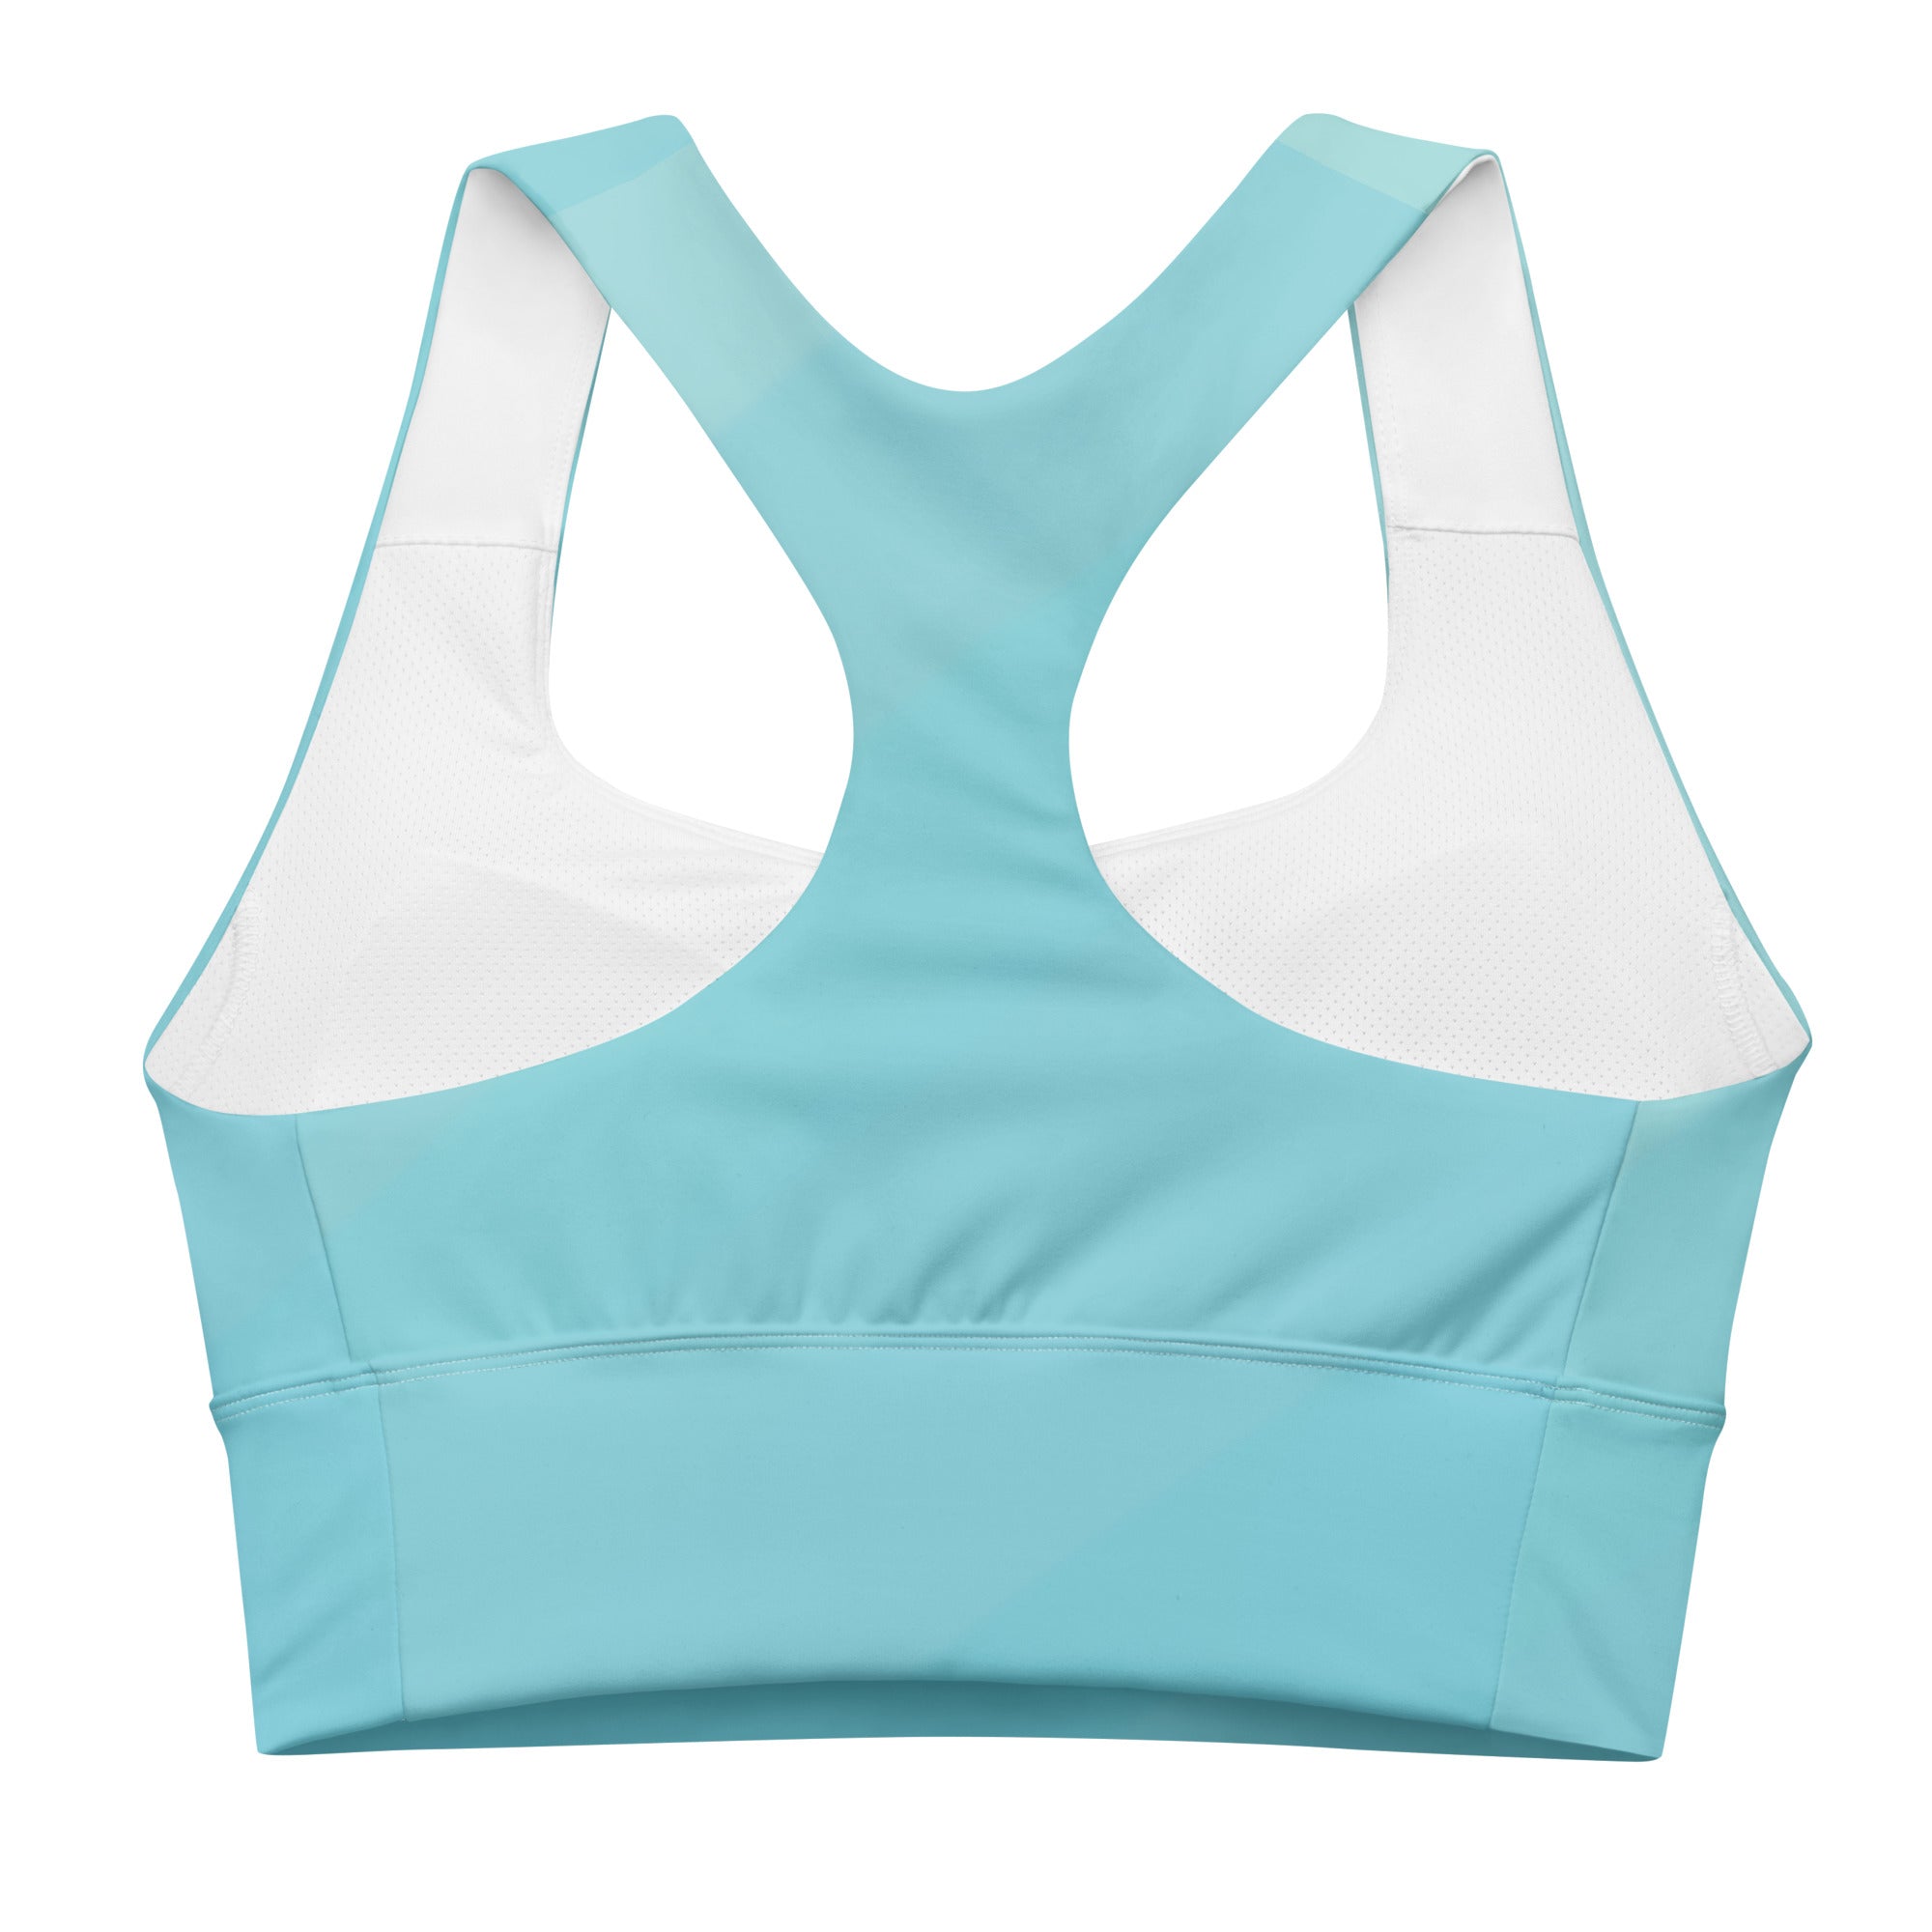 Crafted with premium moisture-wicking fabric, this sports bra offers optimal support and comfort during your workouts, while its longline design provides added coverage and a flattering silhouette. 